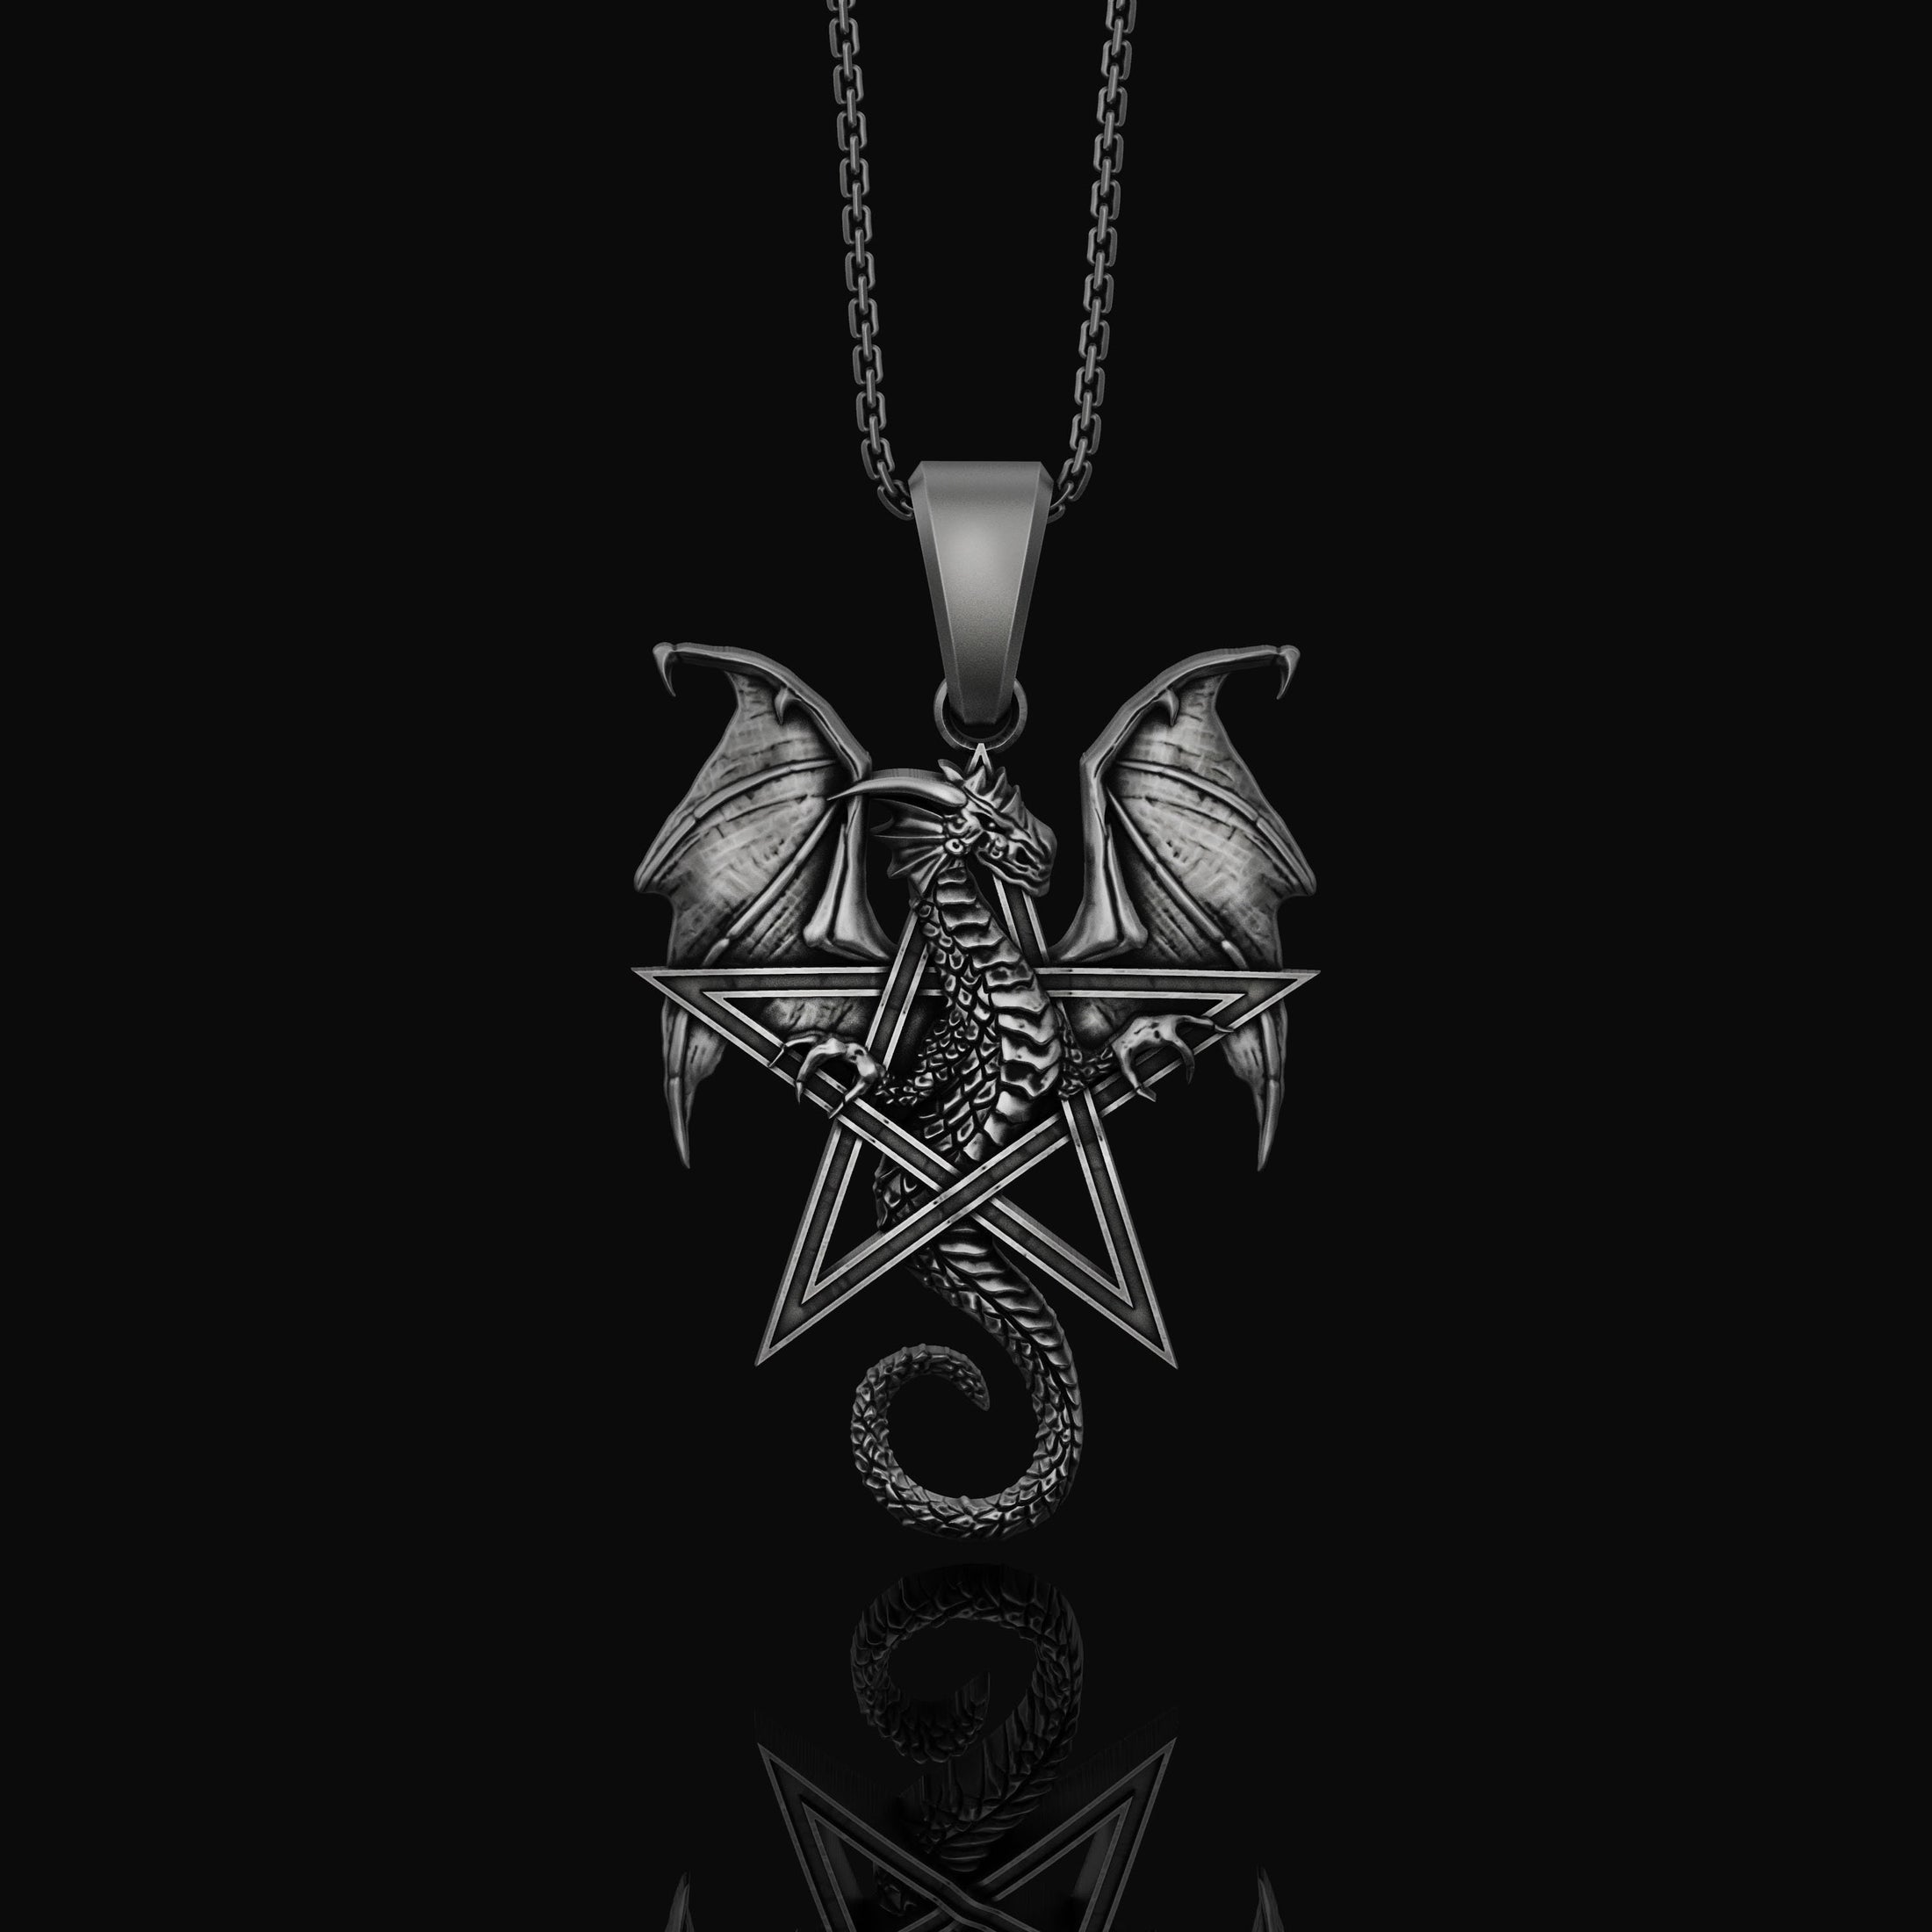 Pentagram Dragon Necklace - Wiccan Gothic Dragon Pendant, Starry Pentacle Charm, Mystical Dragon Jewelry, Enchanted Amulet